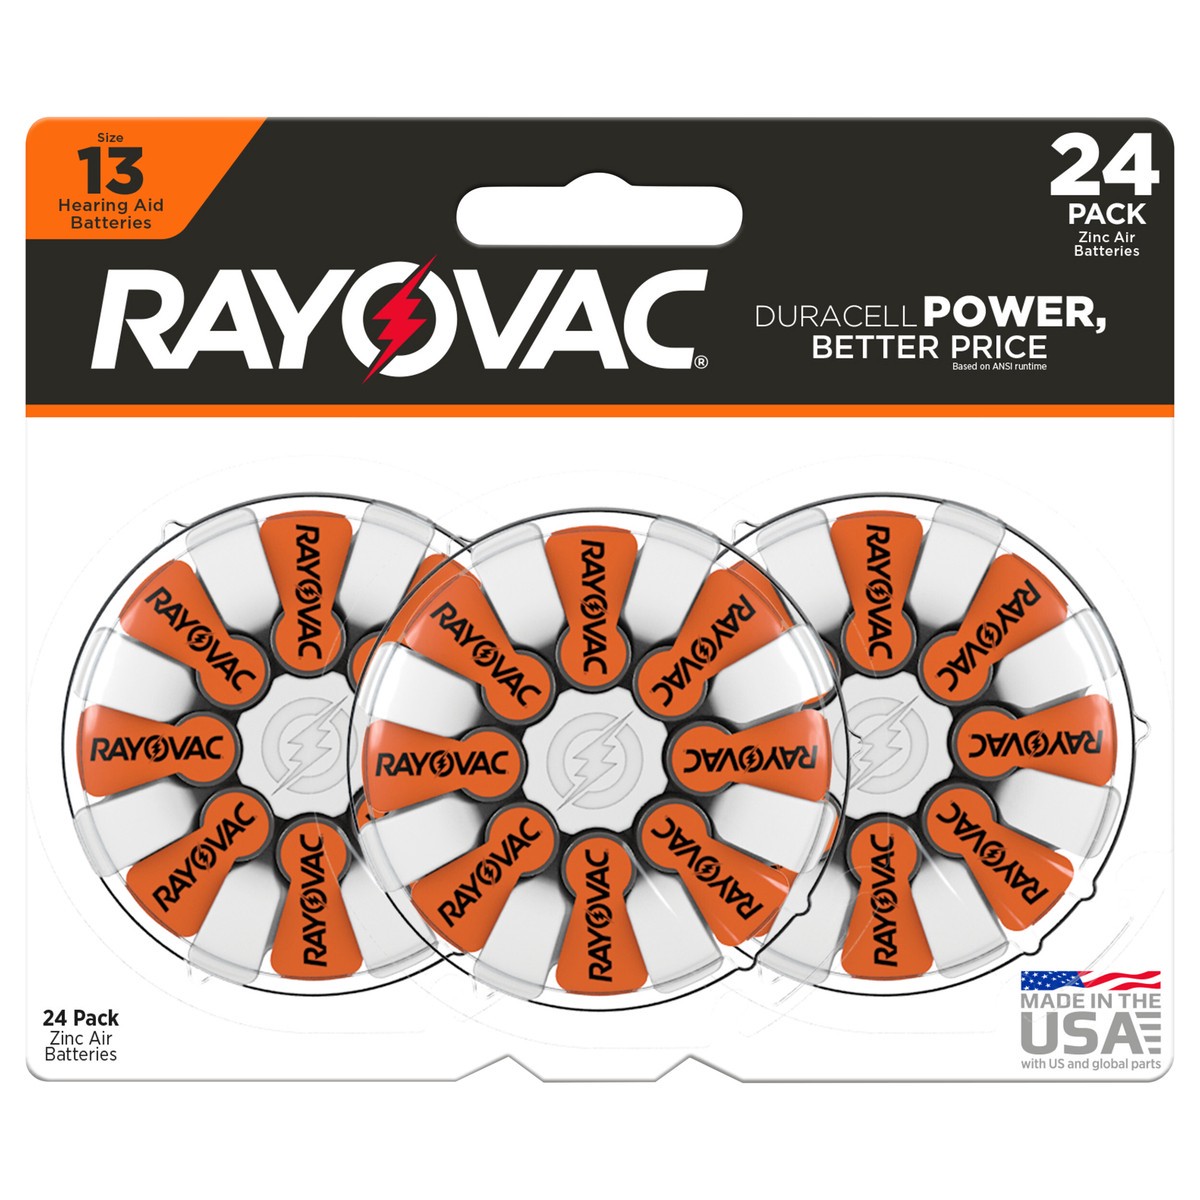 slide 1 of 7, RAYOVAC Size 13 Hearing Aid Batteries (24 Pack), 24 ct